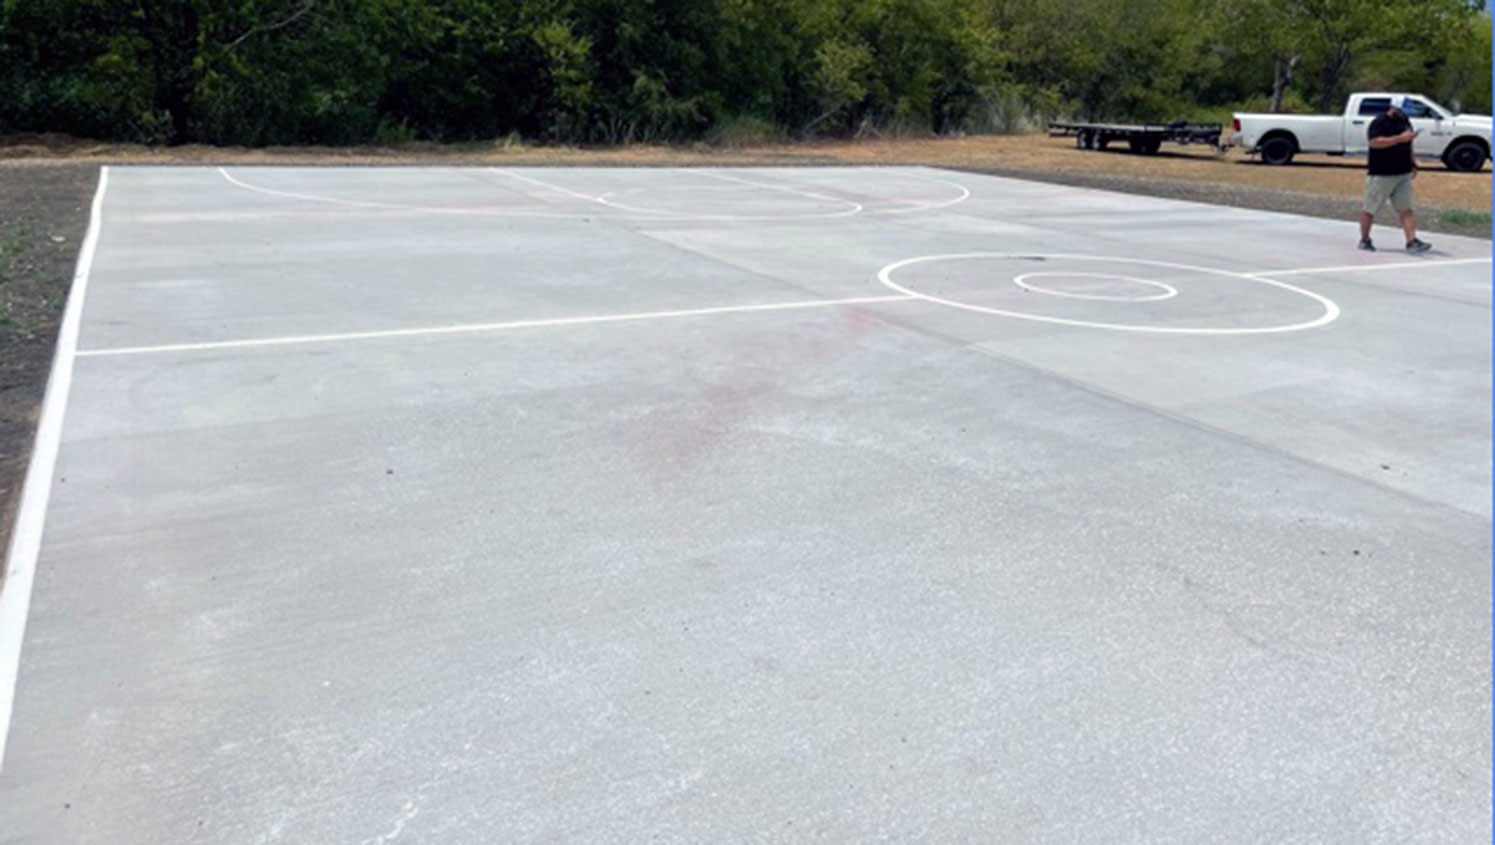 basketball court being prepped for re-striping